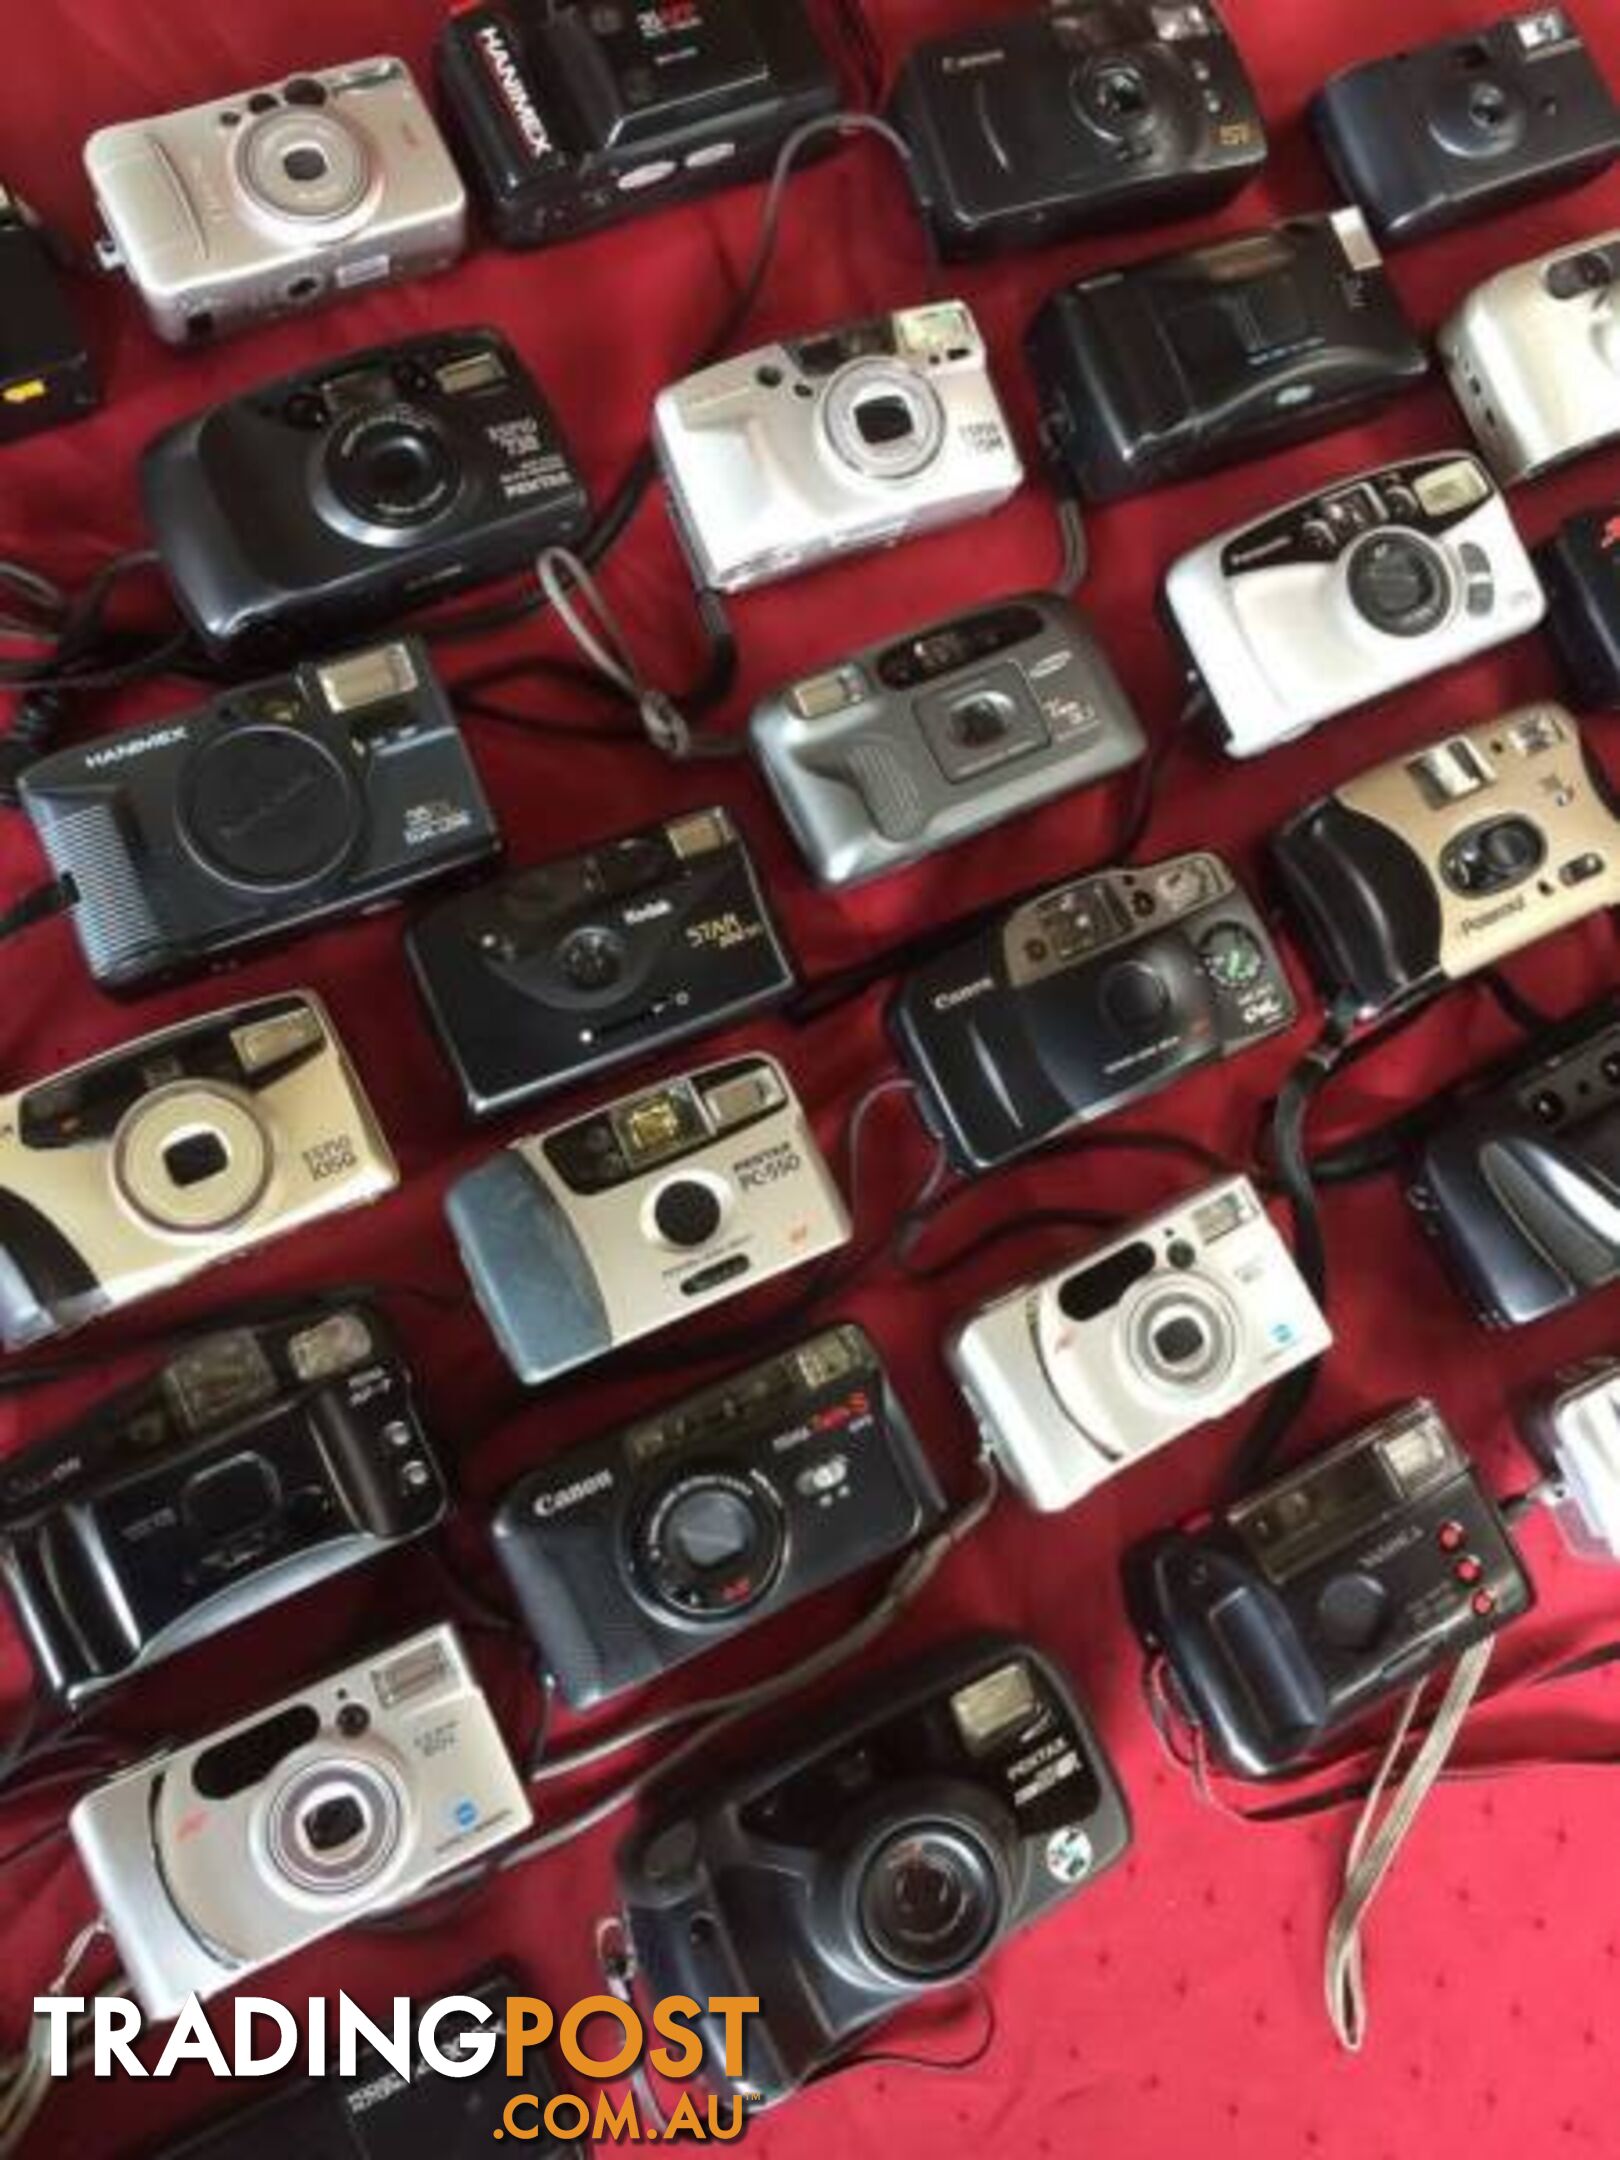 31 x 35MM POINT & SHOOT FILM CAMERAS $200 for the lot